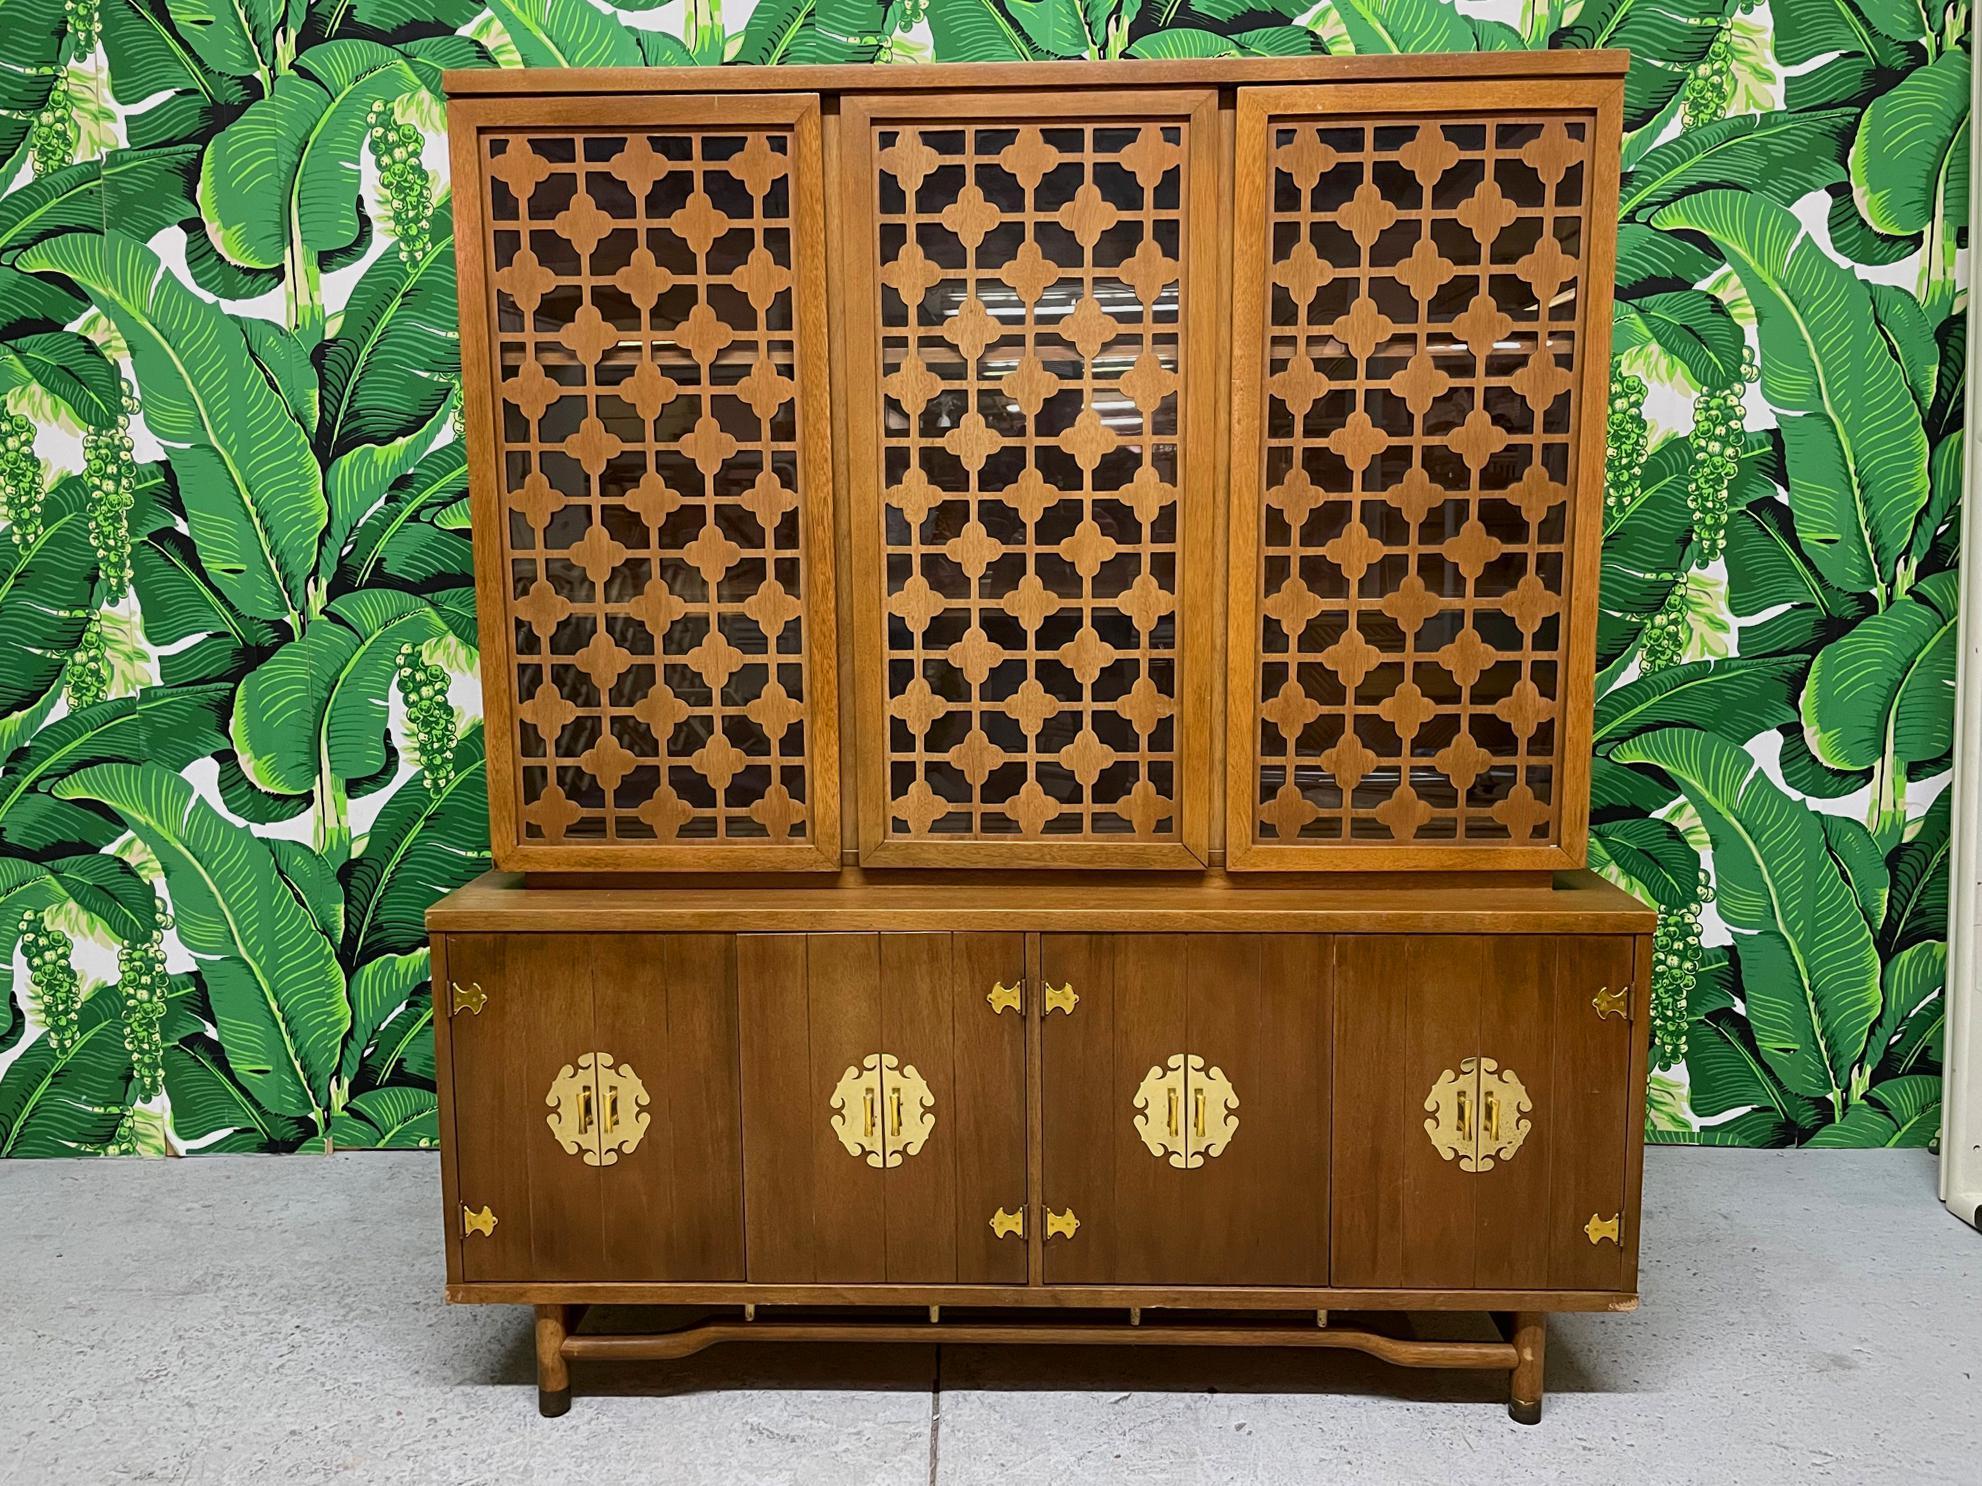 Mid century modern style china cabinet features rattan style legs and brass asian chinoiserie style hardware. Good condition with minor imperfections consistent with age, see photos for condition details.
For a shipping quote to your exact zip code,